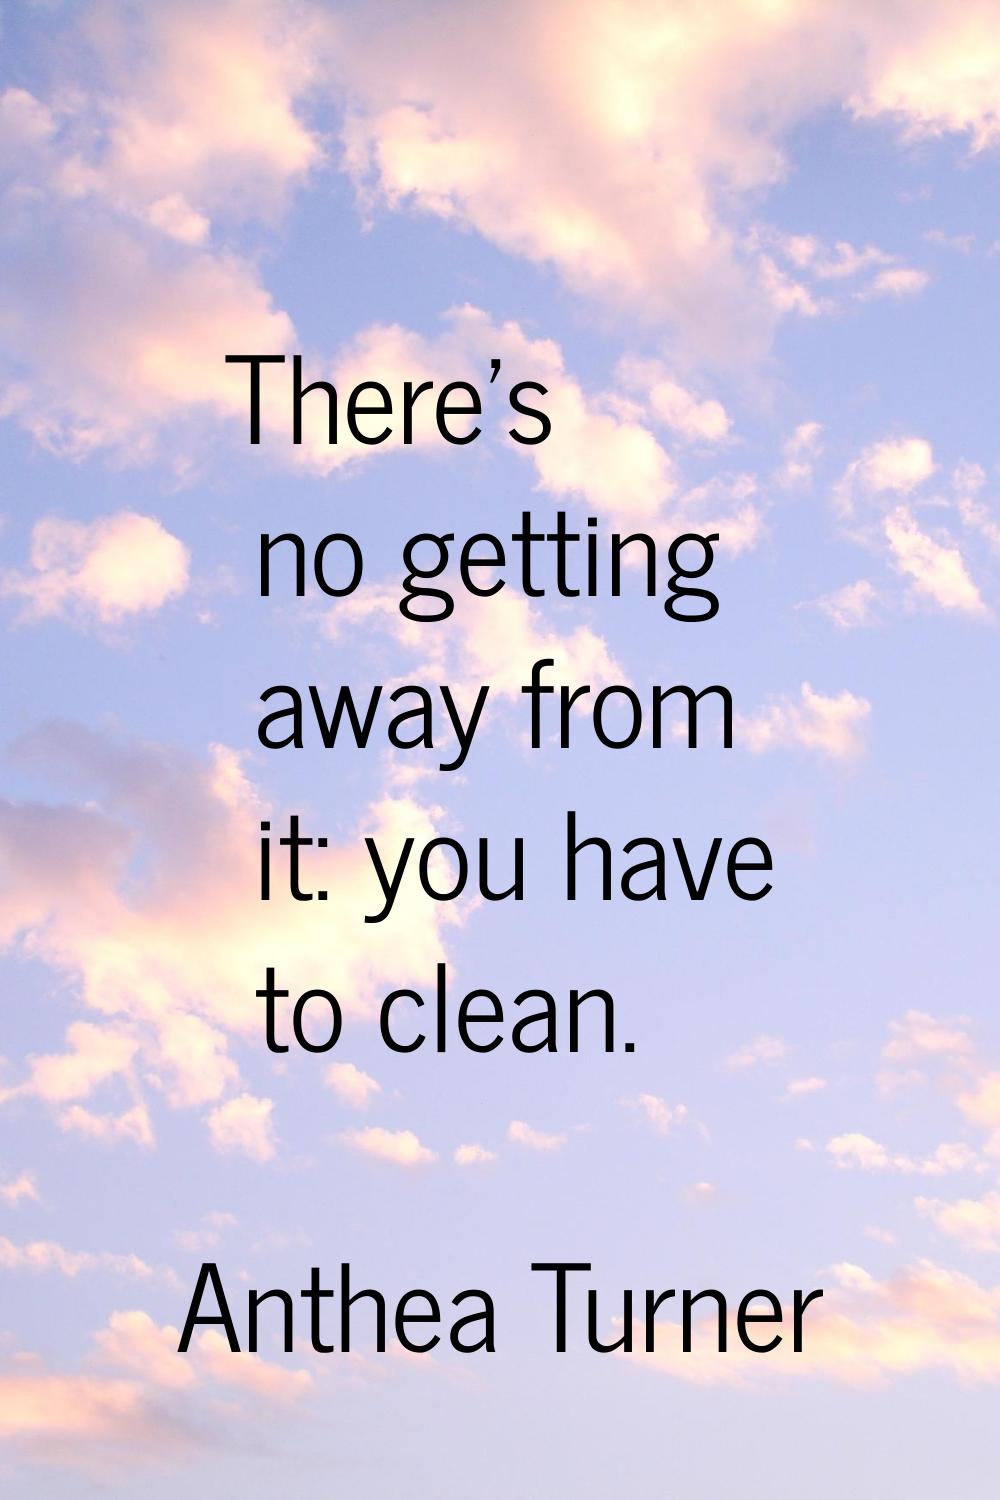 There's no getting away from it: you have to clean.